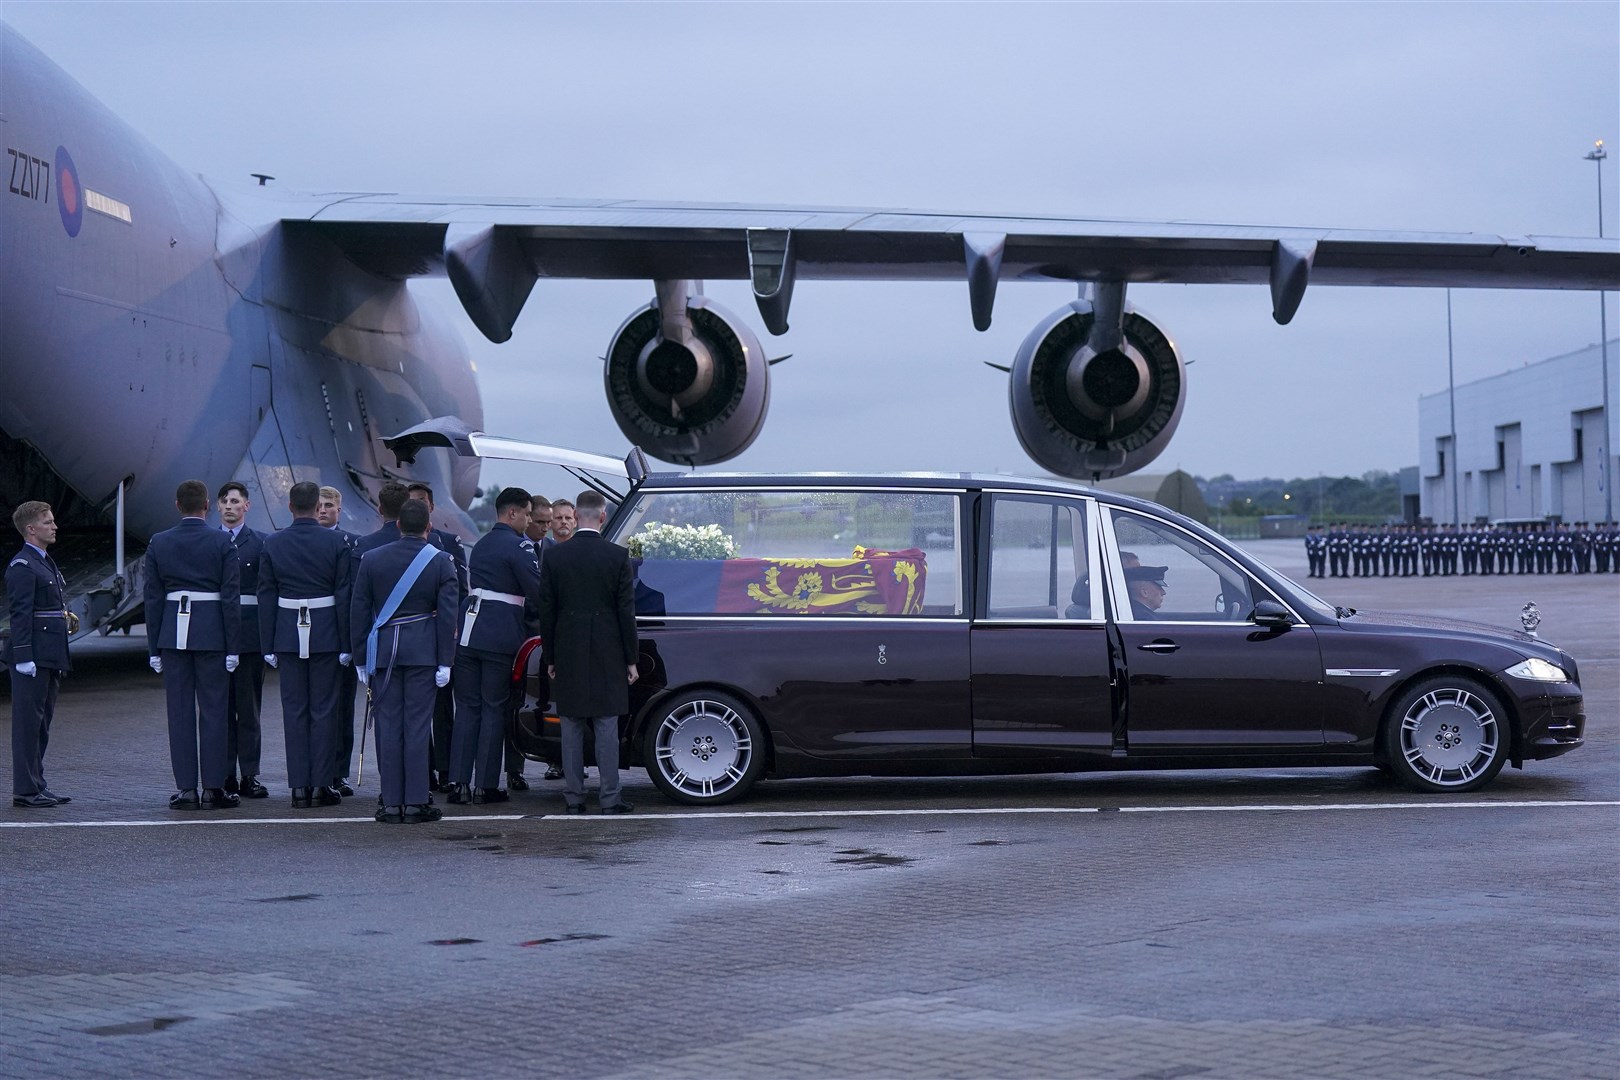 The coffin of Queen Elizabeth II is placed in the waiting hearse at RAF Northolt, west London (Arthur Edwards/The Sun/PA)